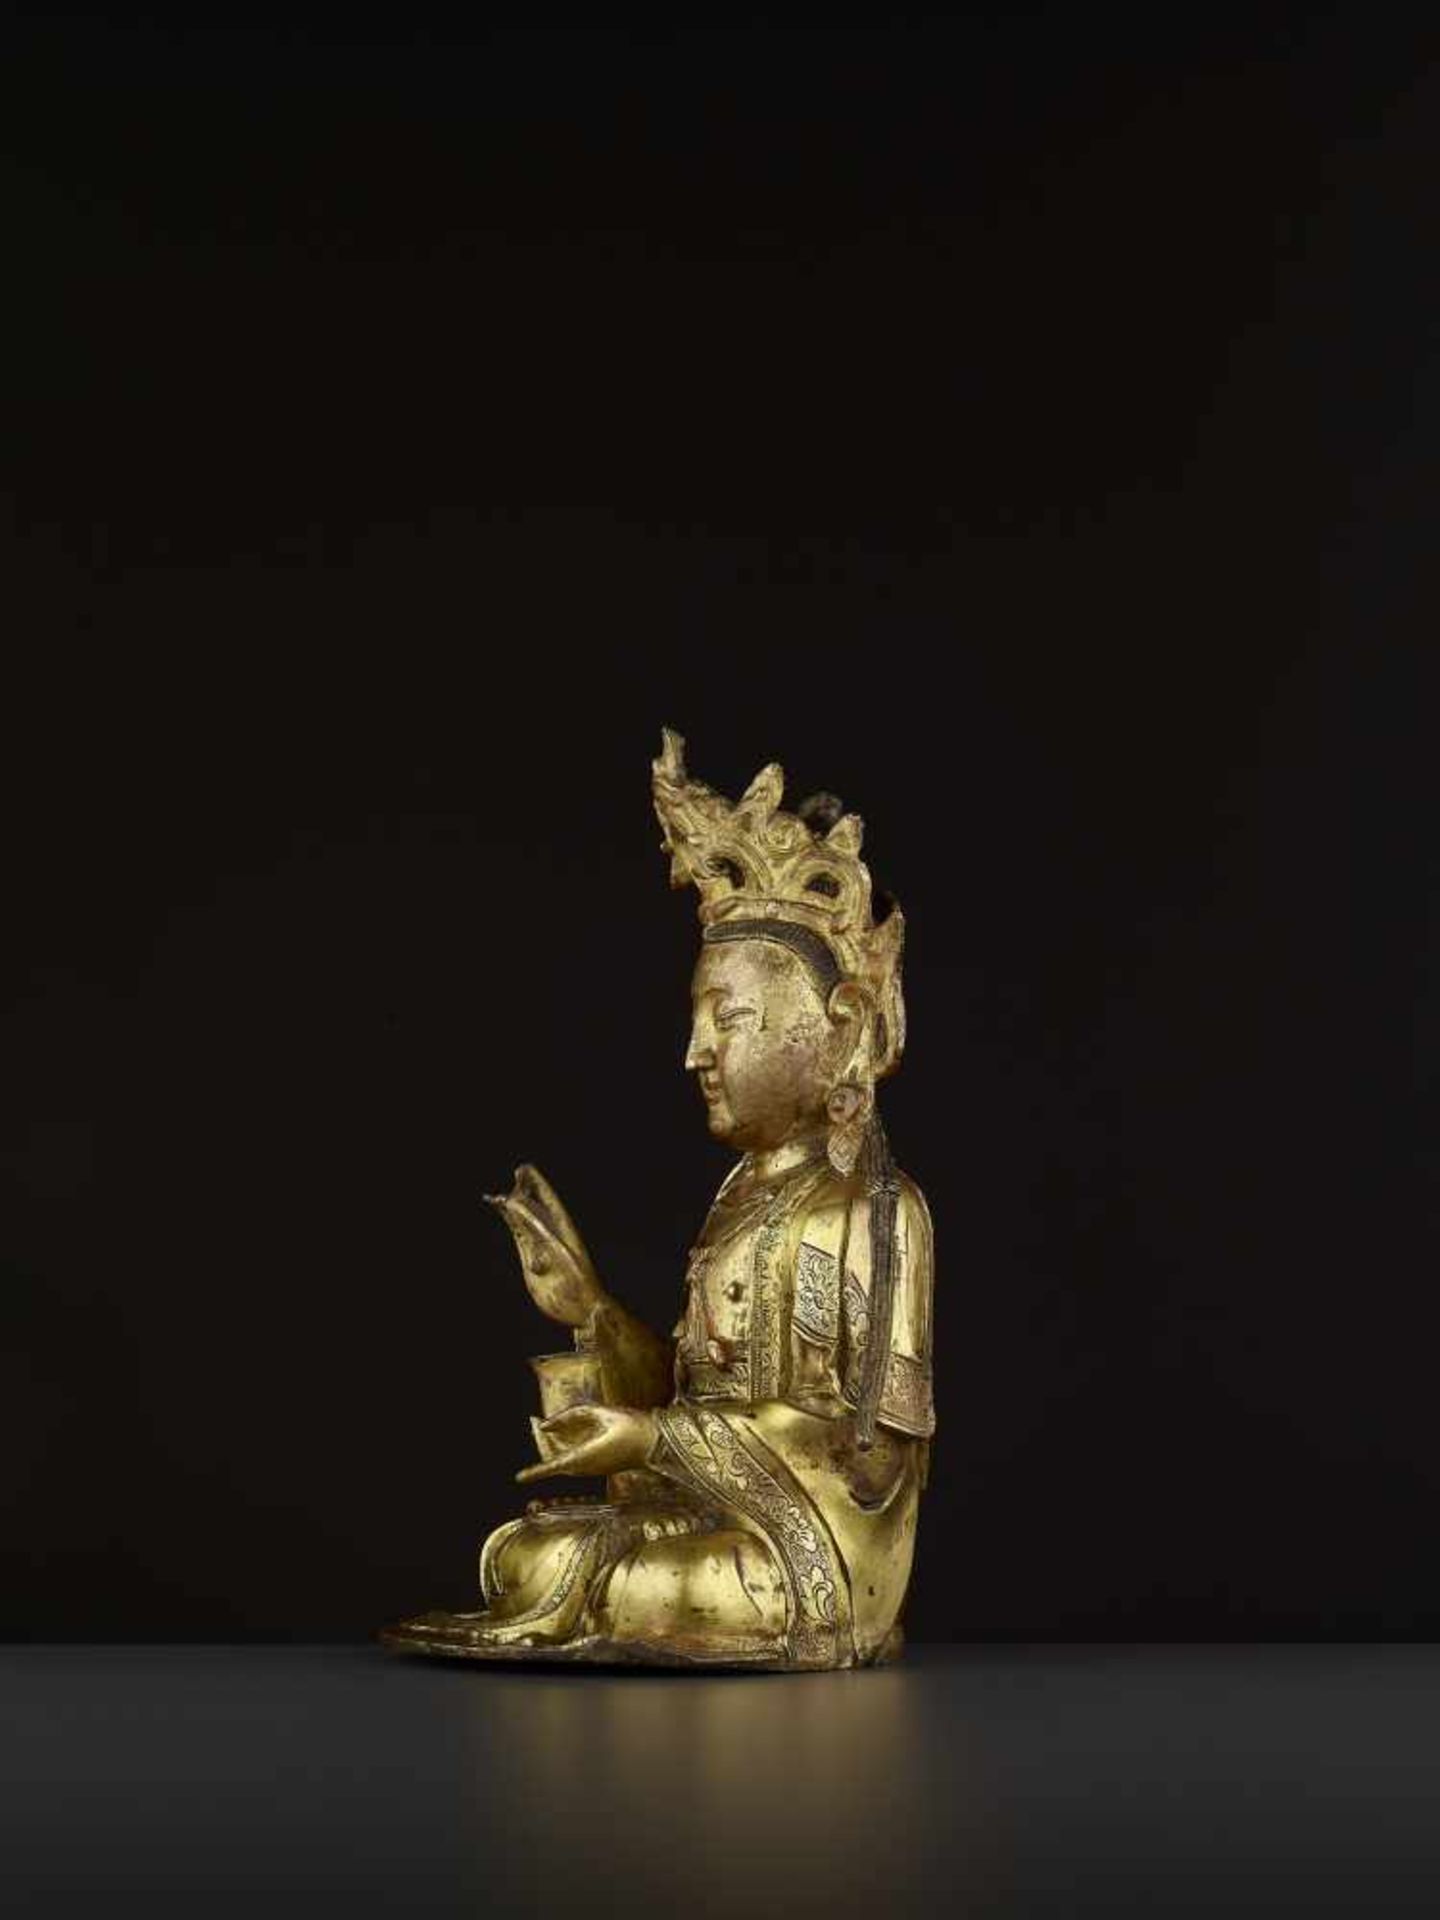 A FINELY CAST GILT-BRONZE FIGURE OF GUANYIN, MING DYNASTY China, 16th-17th century. The figure is - Image 4 of 10